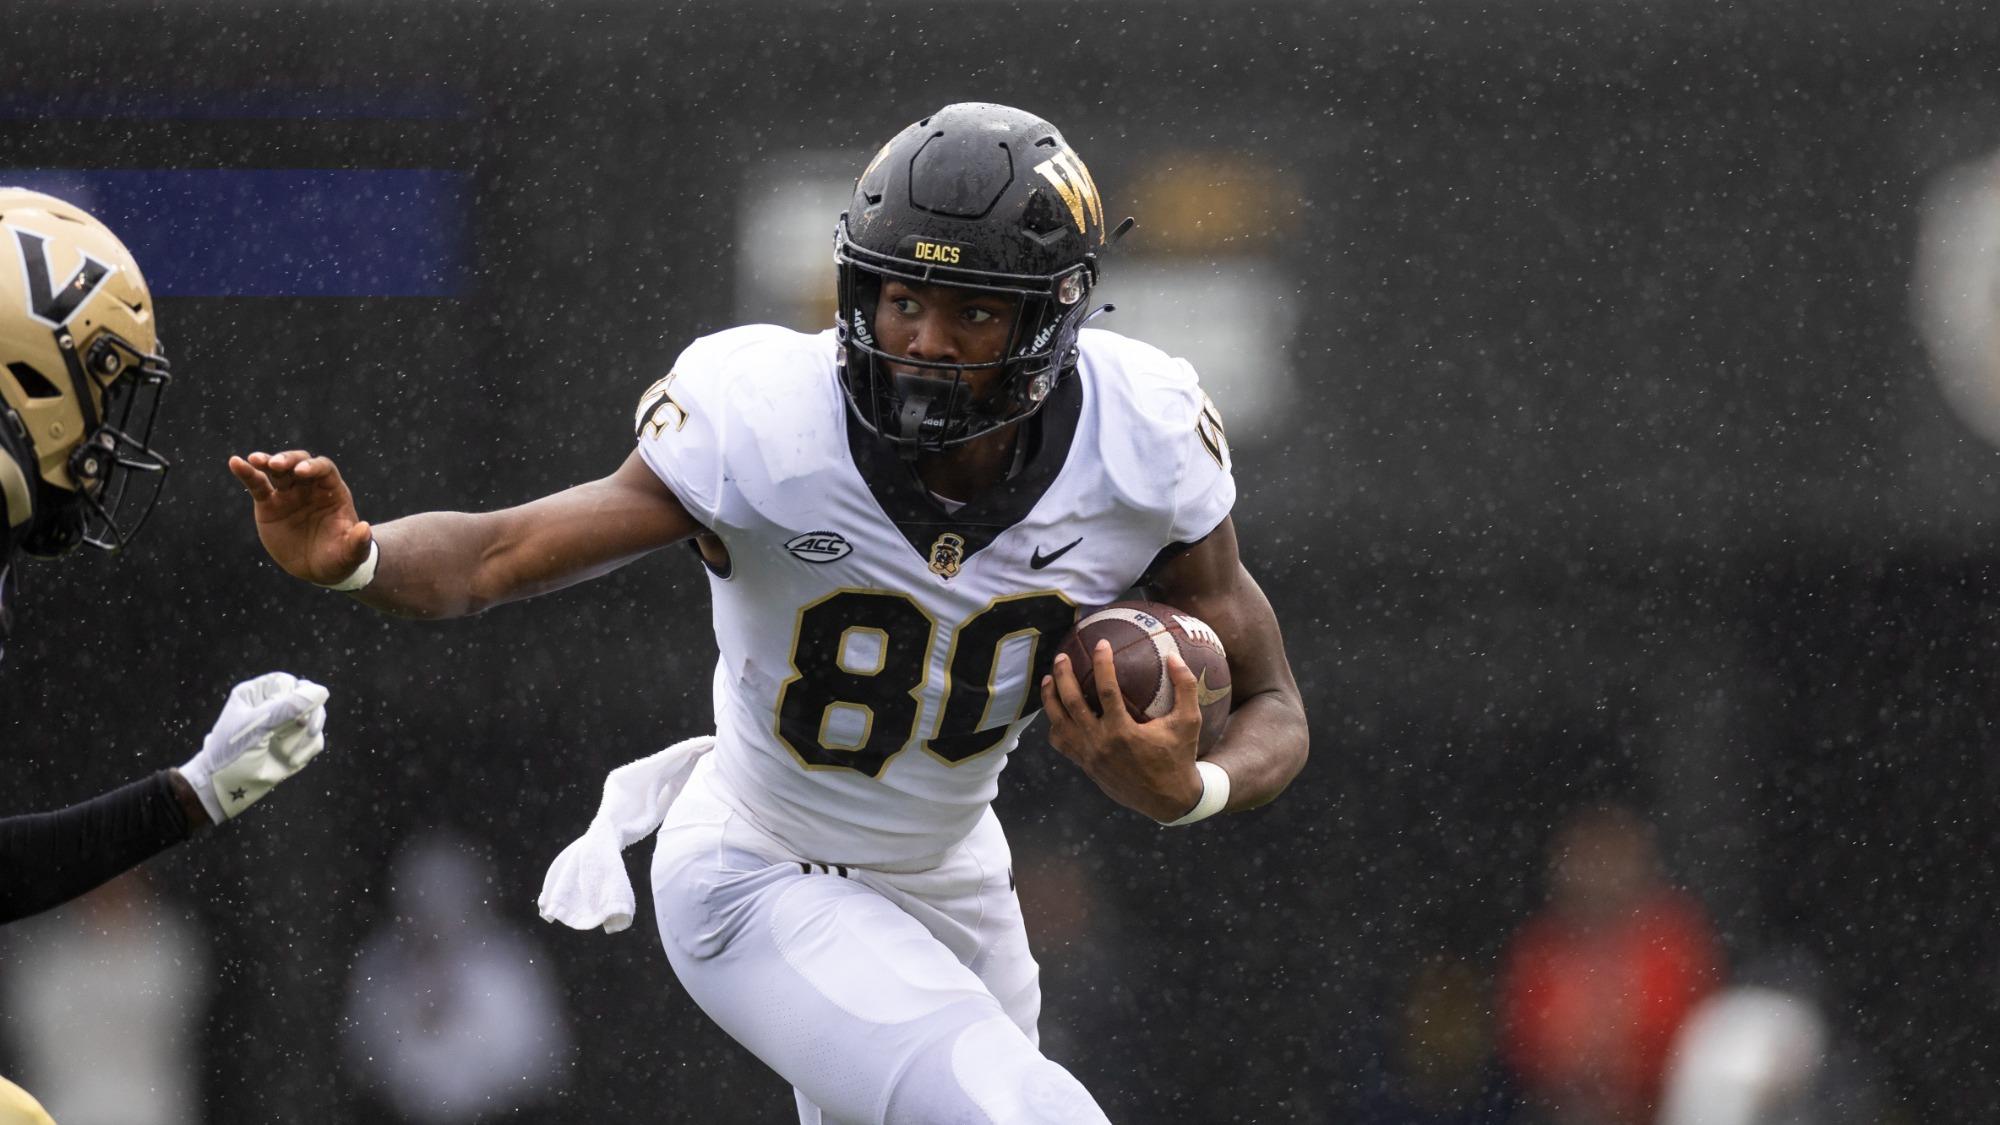 Jahmal Banks is a solid athlete with great size for a receiver in Wake Forest's offense. He displays natural hands and great body control. Hula Bowl scout Lucas Perez breaks down Banks as an NFL Prospect in his report